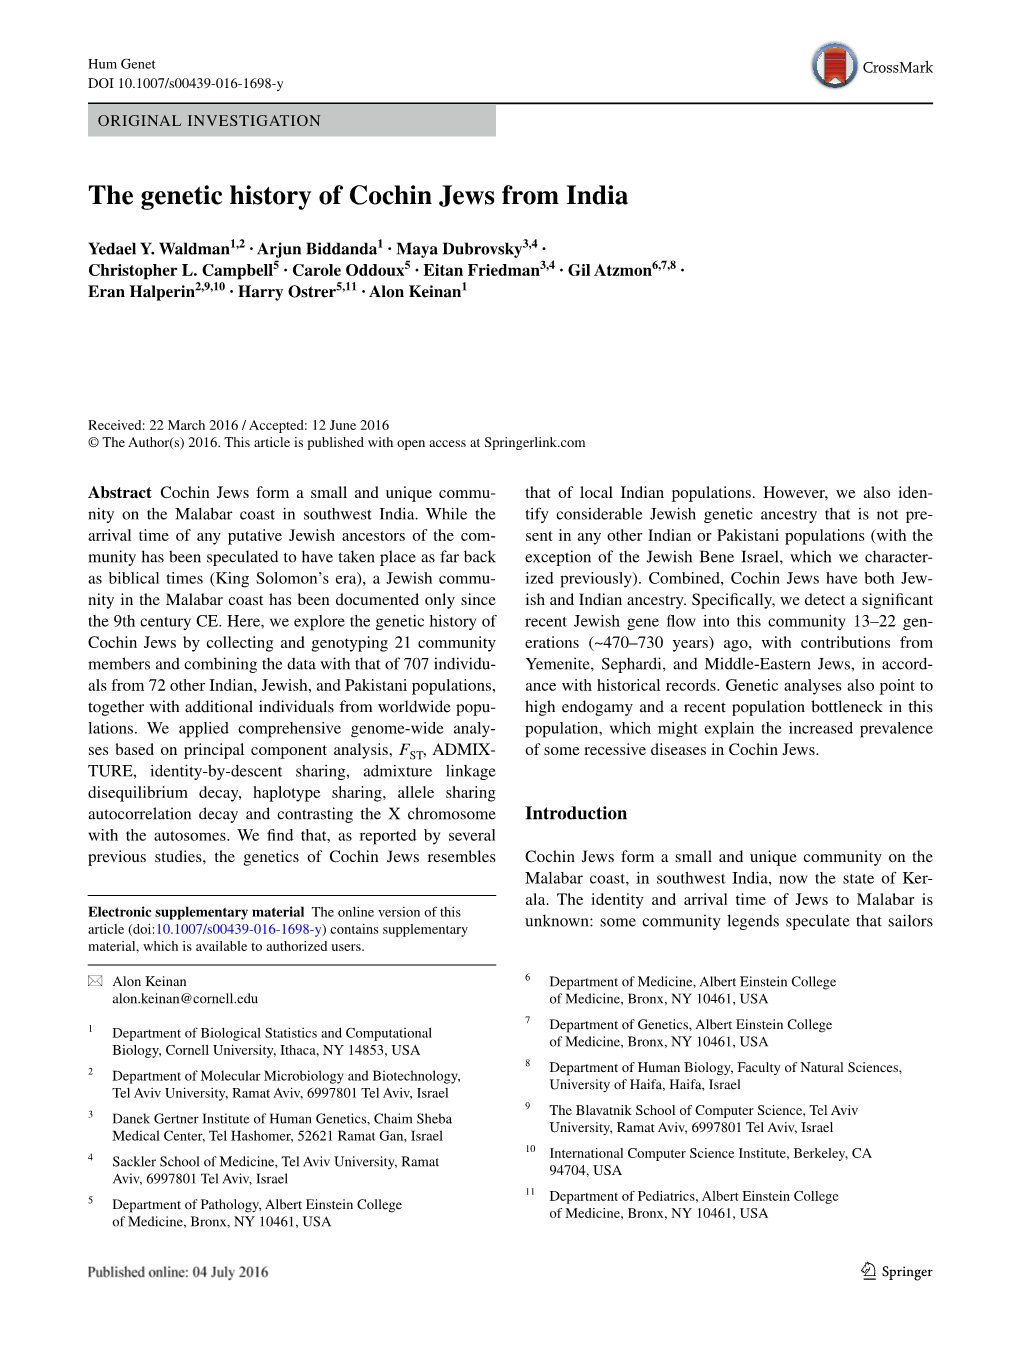 The Genetic History of Cochin Jews from India